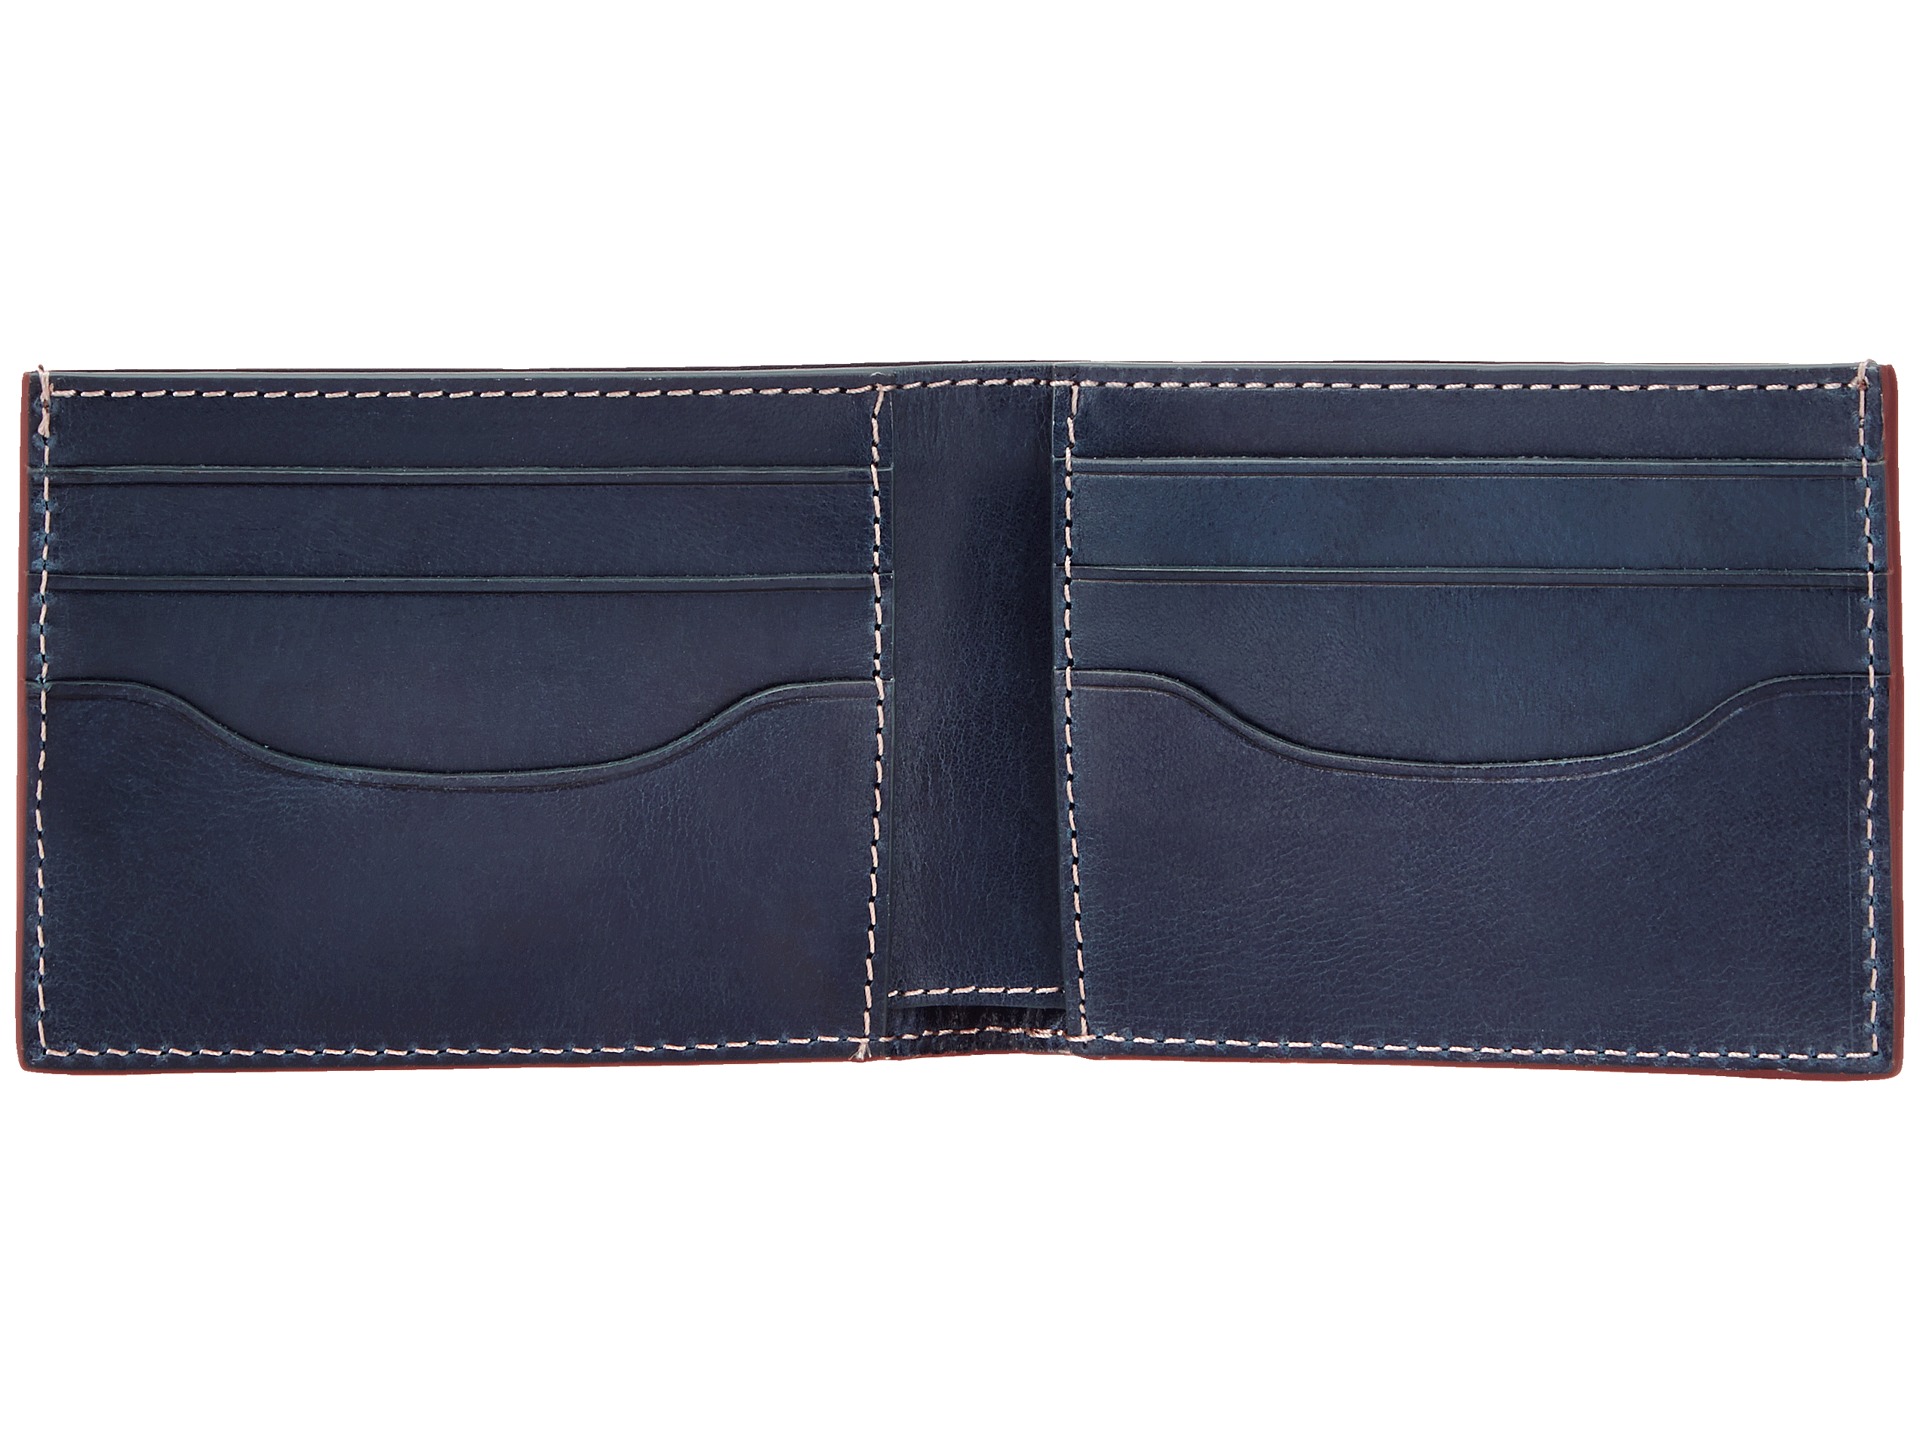 Jack Spade Mitchell Leather Index Wallet Saddle/Navy - Zappos.com Free ...